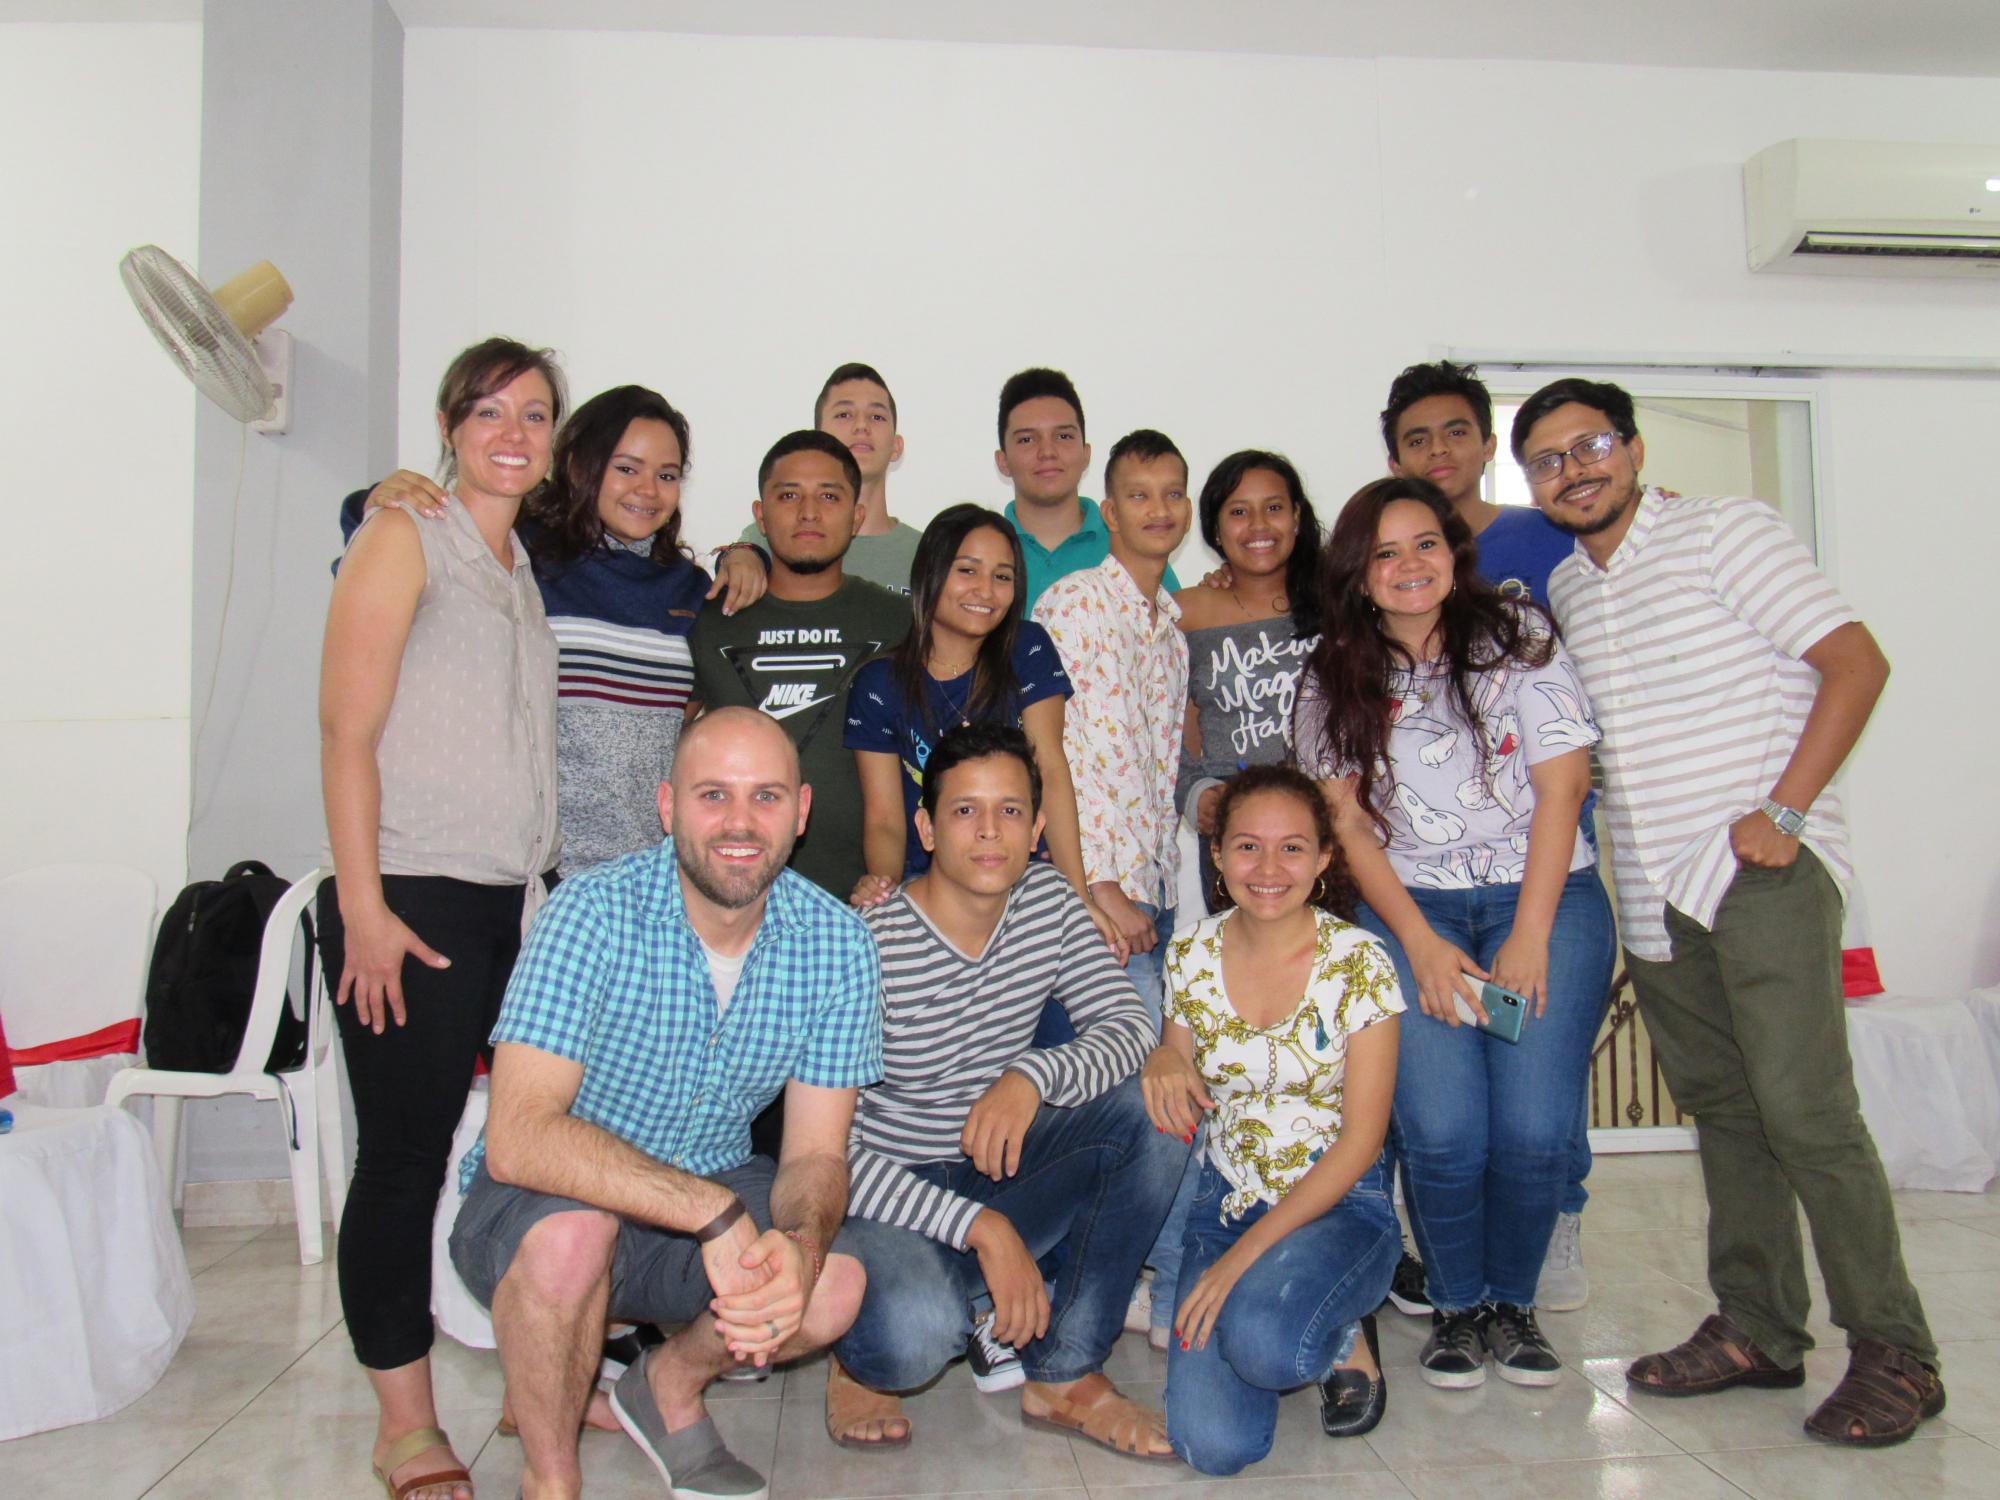 Workshop participants with teachers and MMN workers Eric Martin and Kelly Martin Frey of the Seminario Bíblico Menonita de Colombia. Photo supplied.